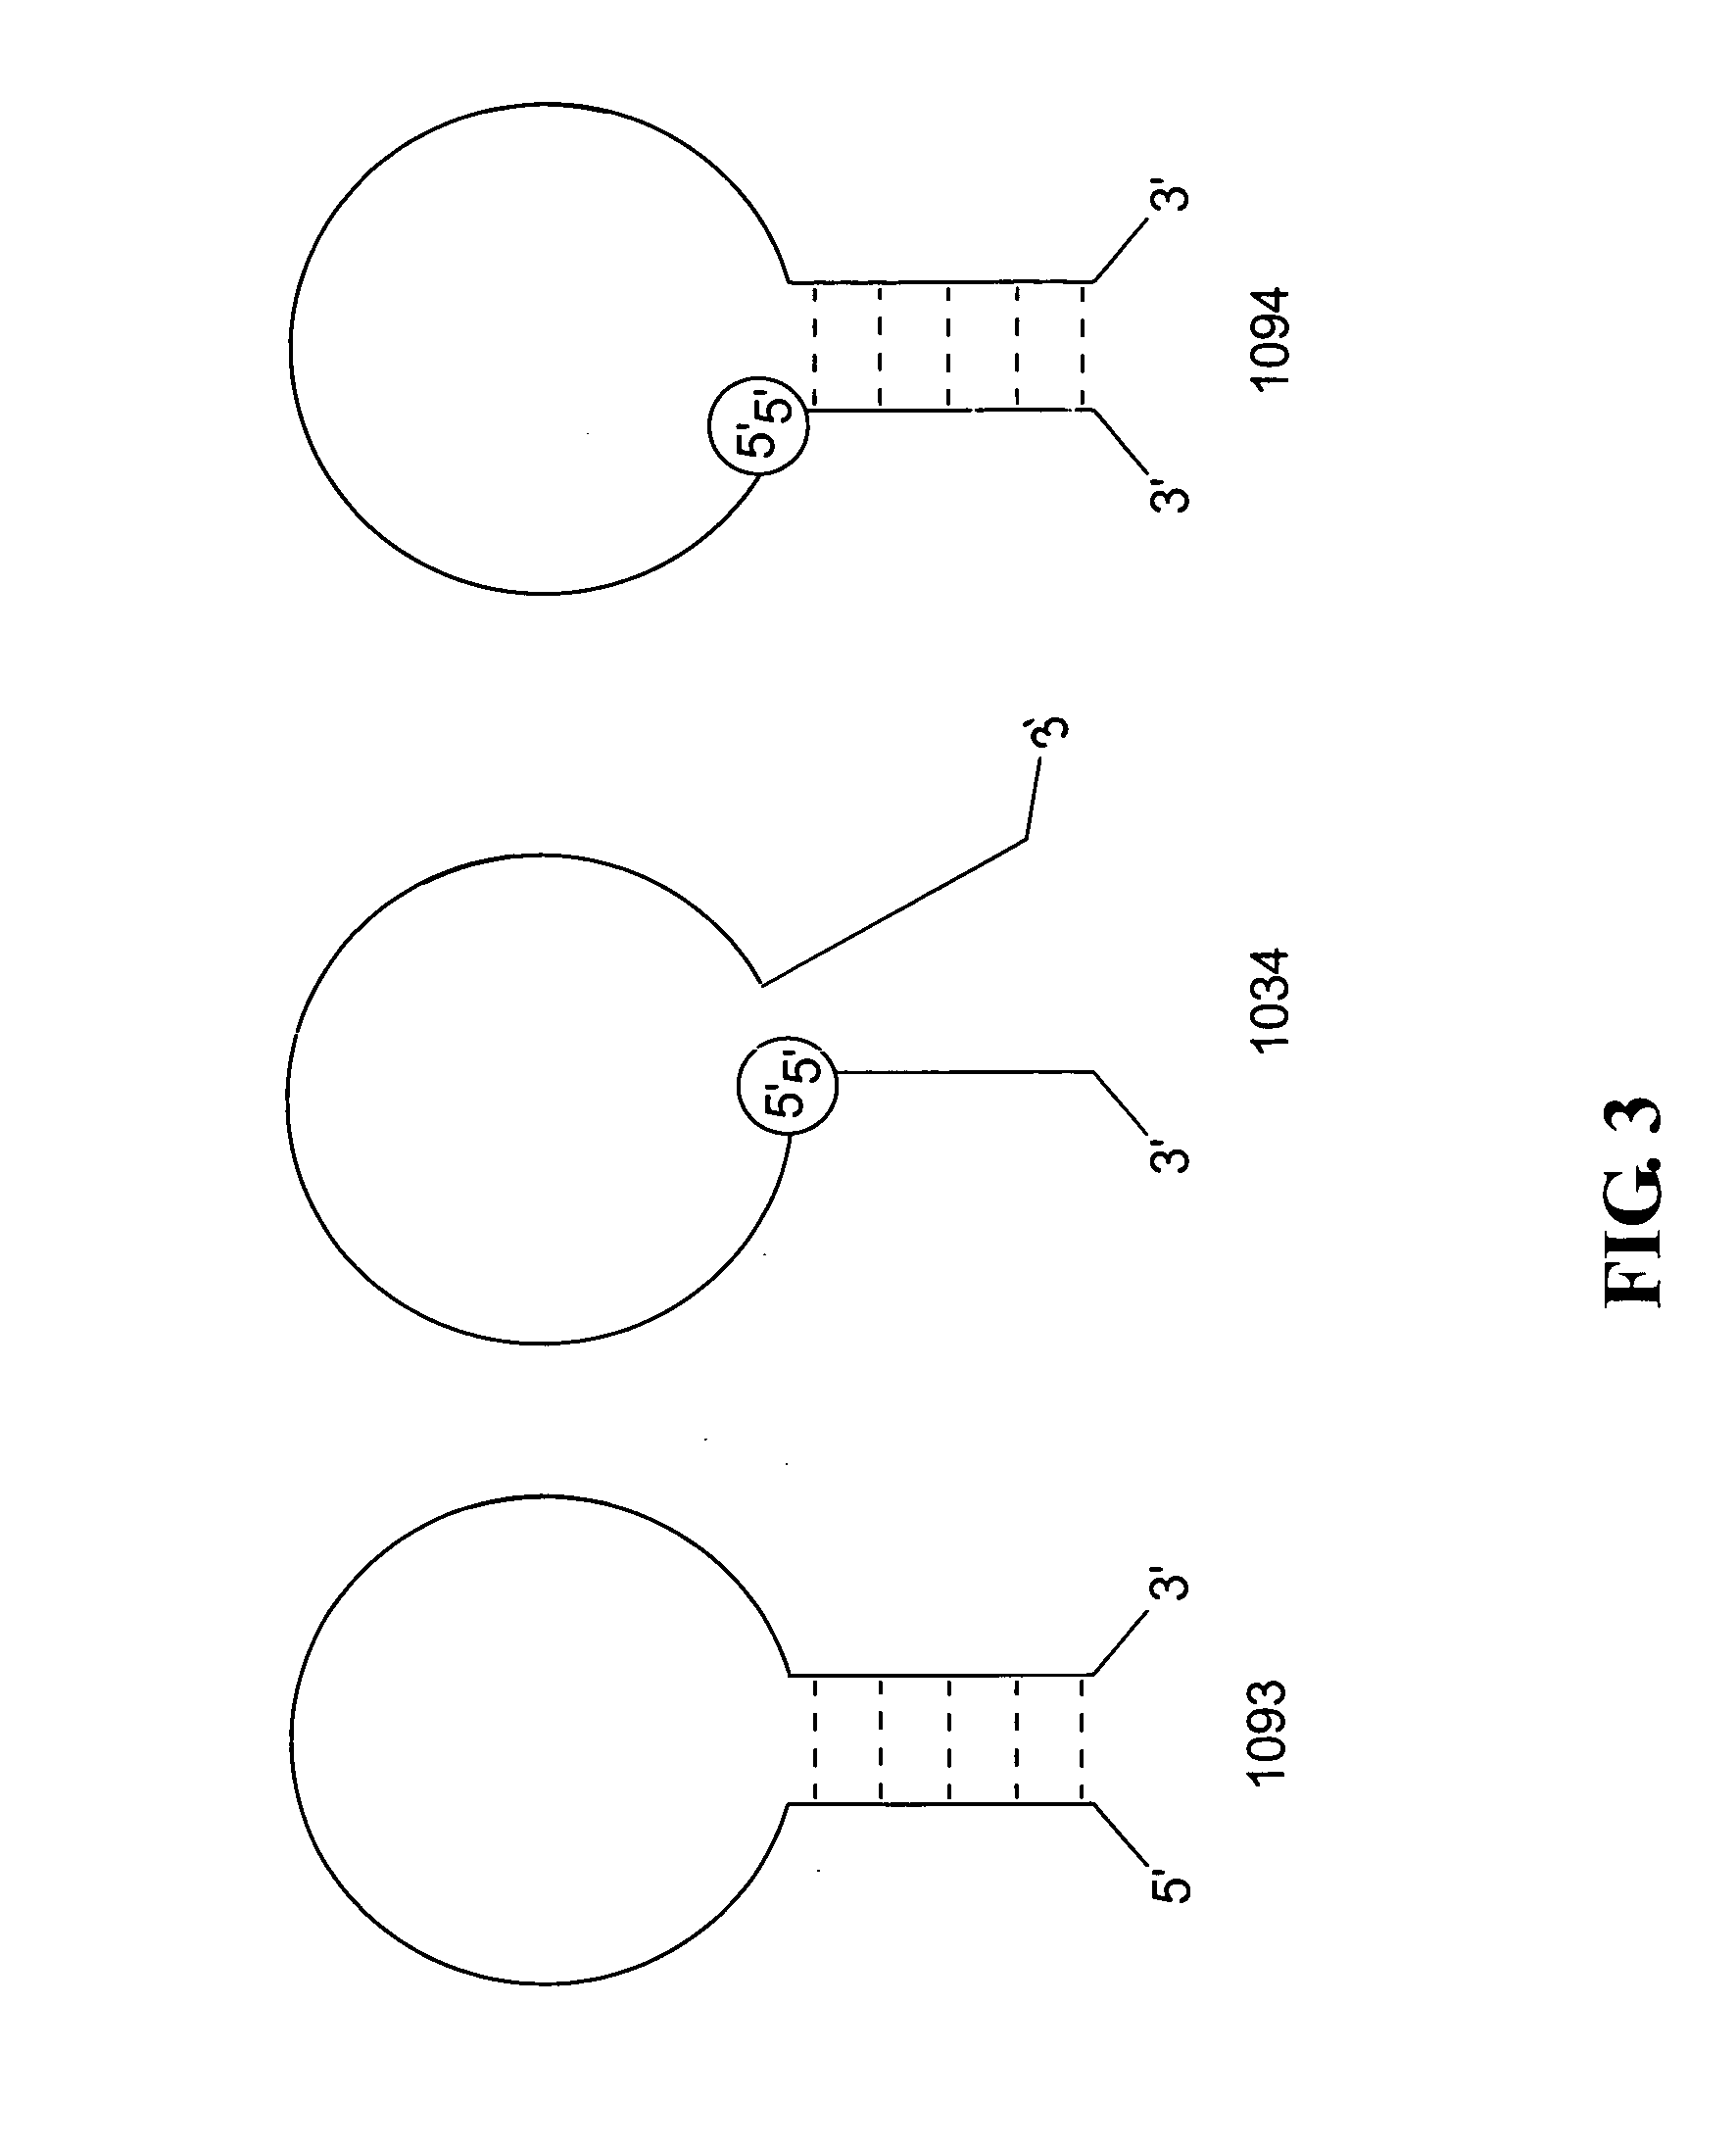 Polynucleotide detection method employing self-reporting dual inversion probes